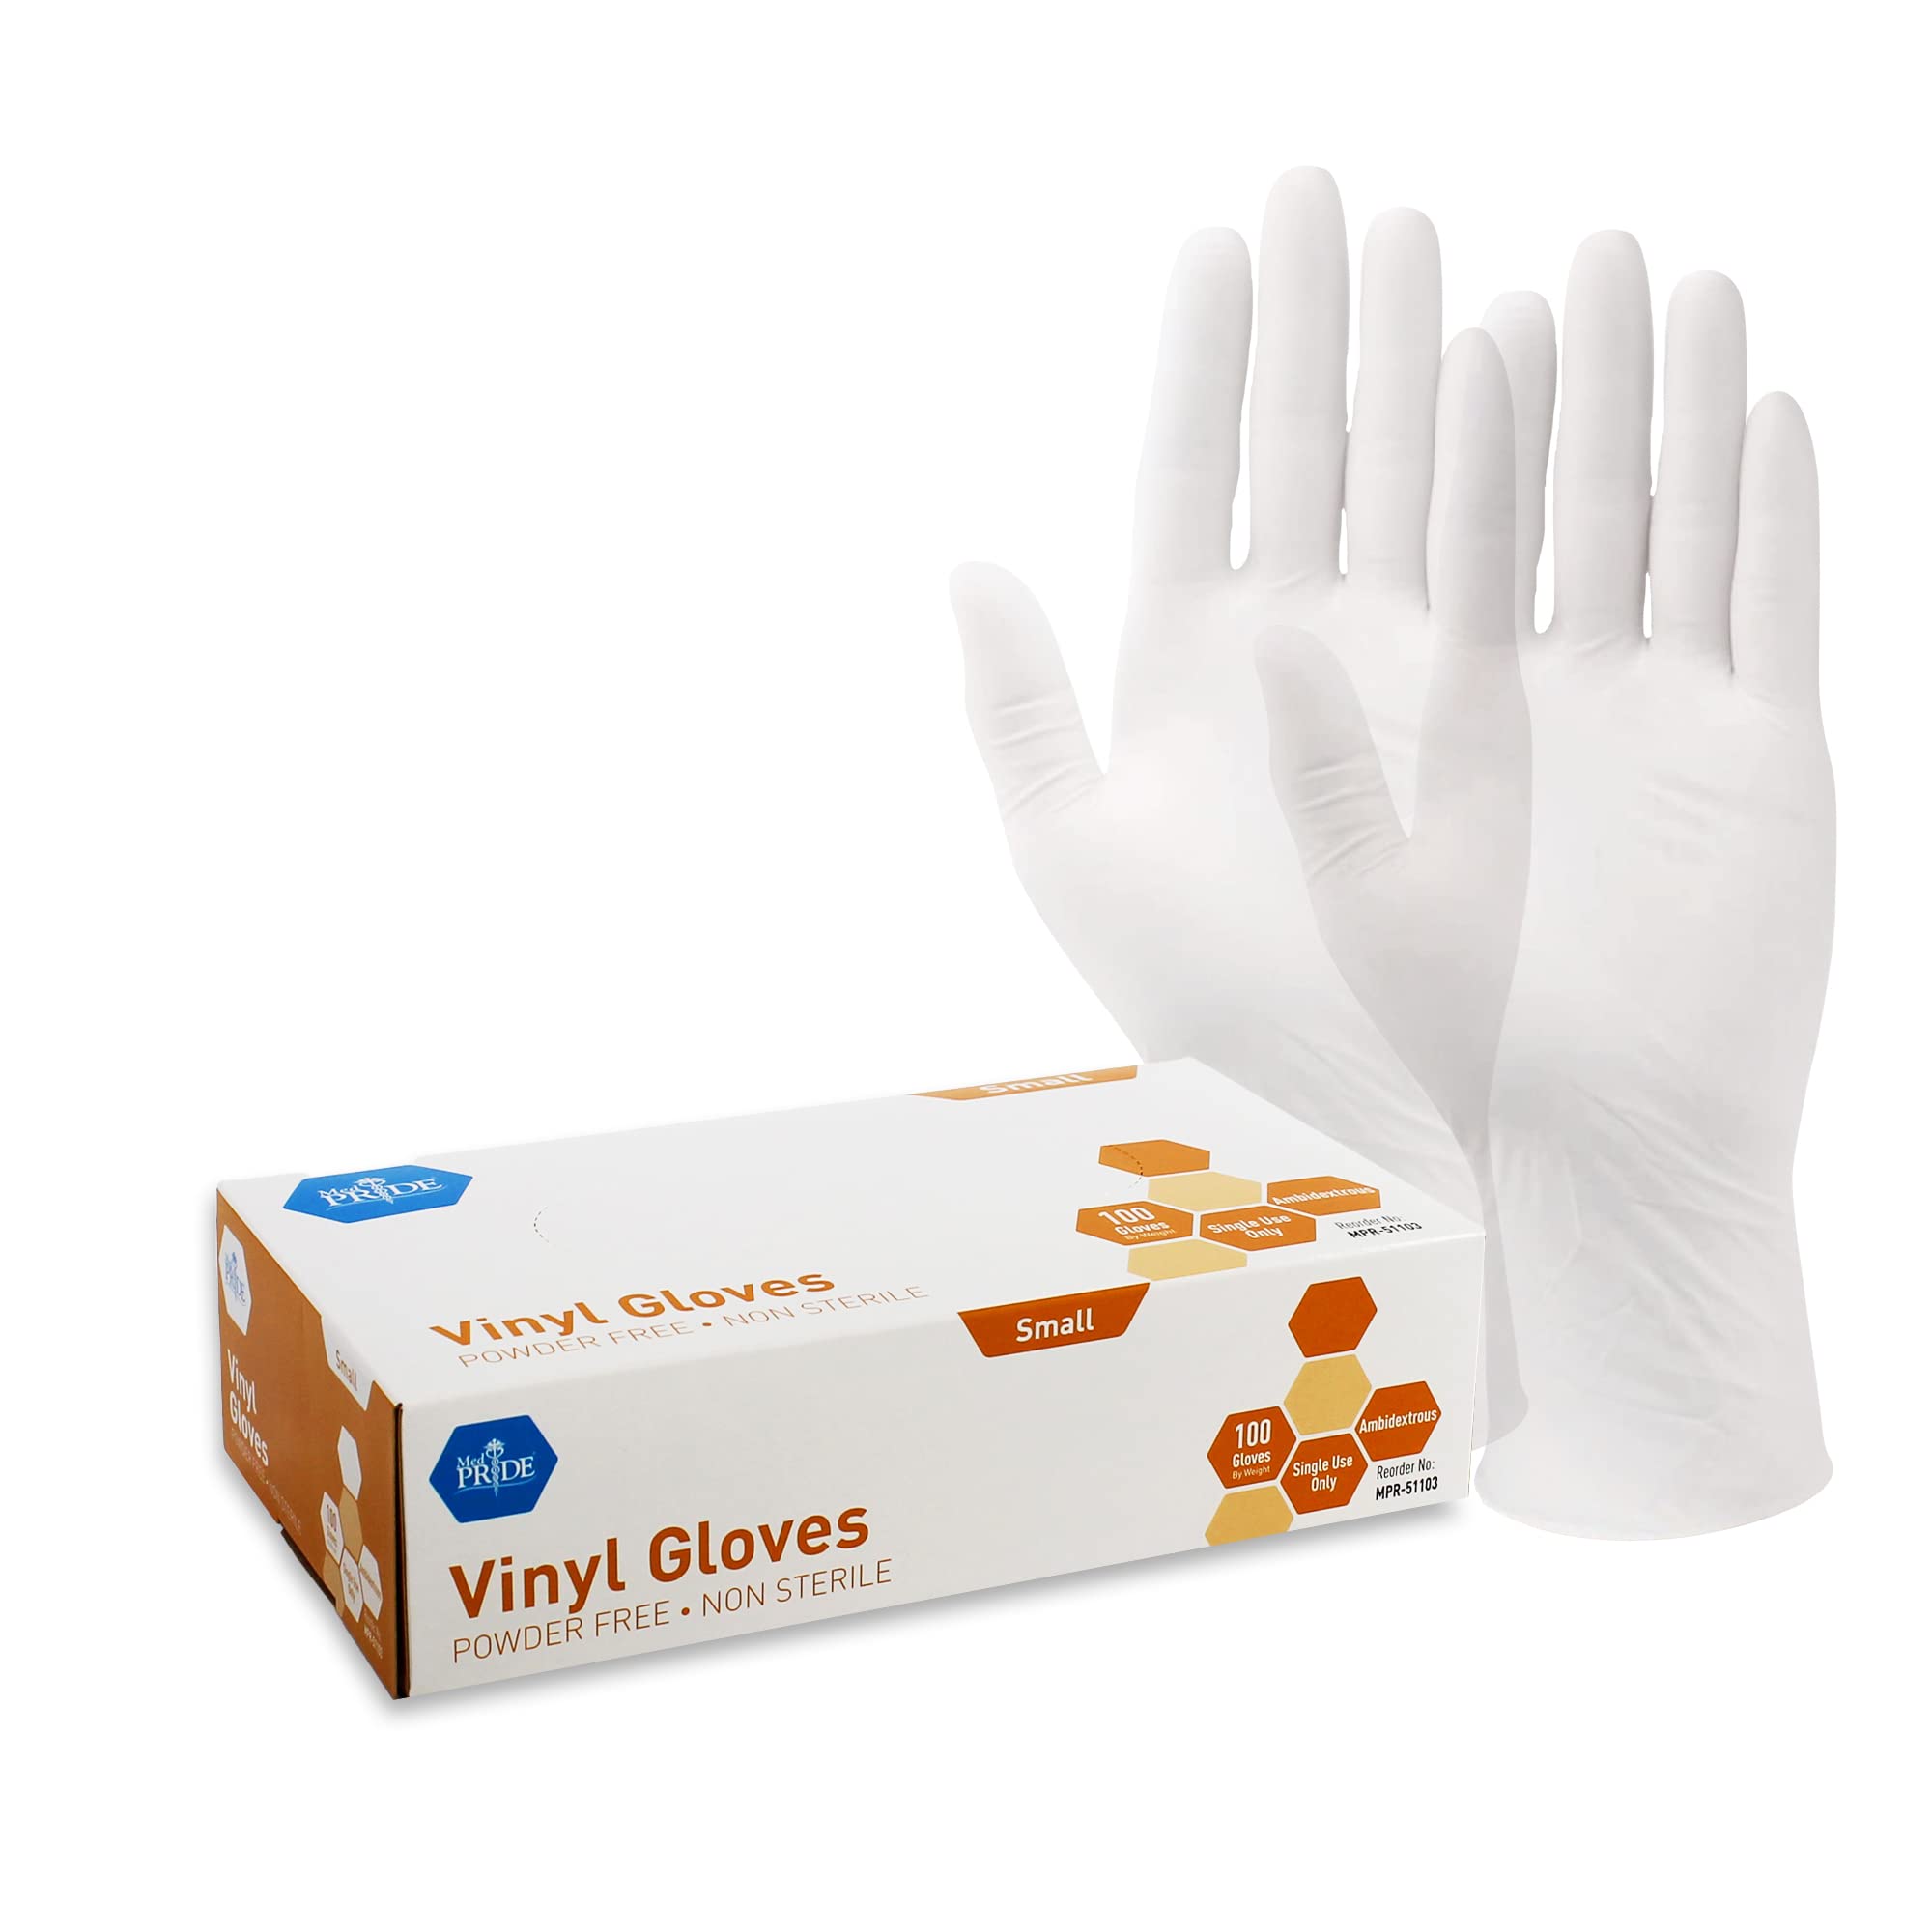 MED PRIDE Vinyl Gloves| X-Large Box of 100| 4.3 mil Thick, Powder-Free, Non-Sterile, Heavy Duty Disposable Gloves| Professional Grade for Healthcare, Medical, Food Handling, and More